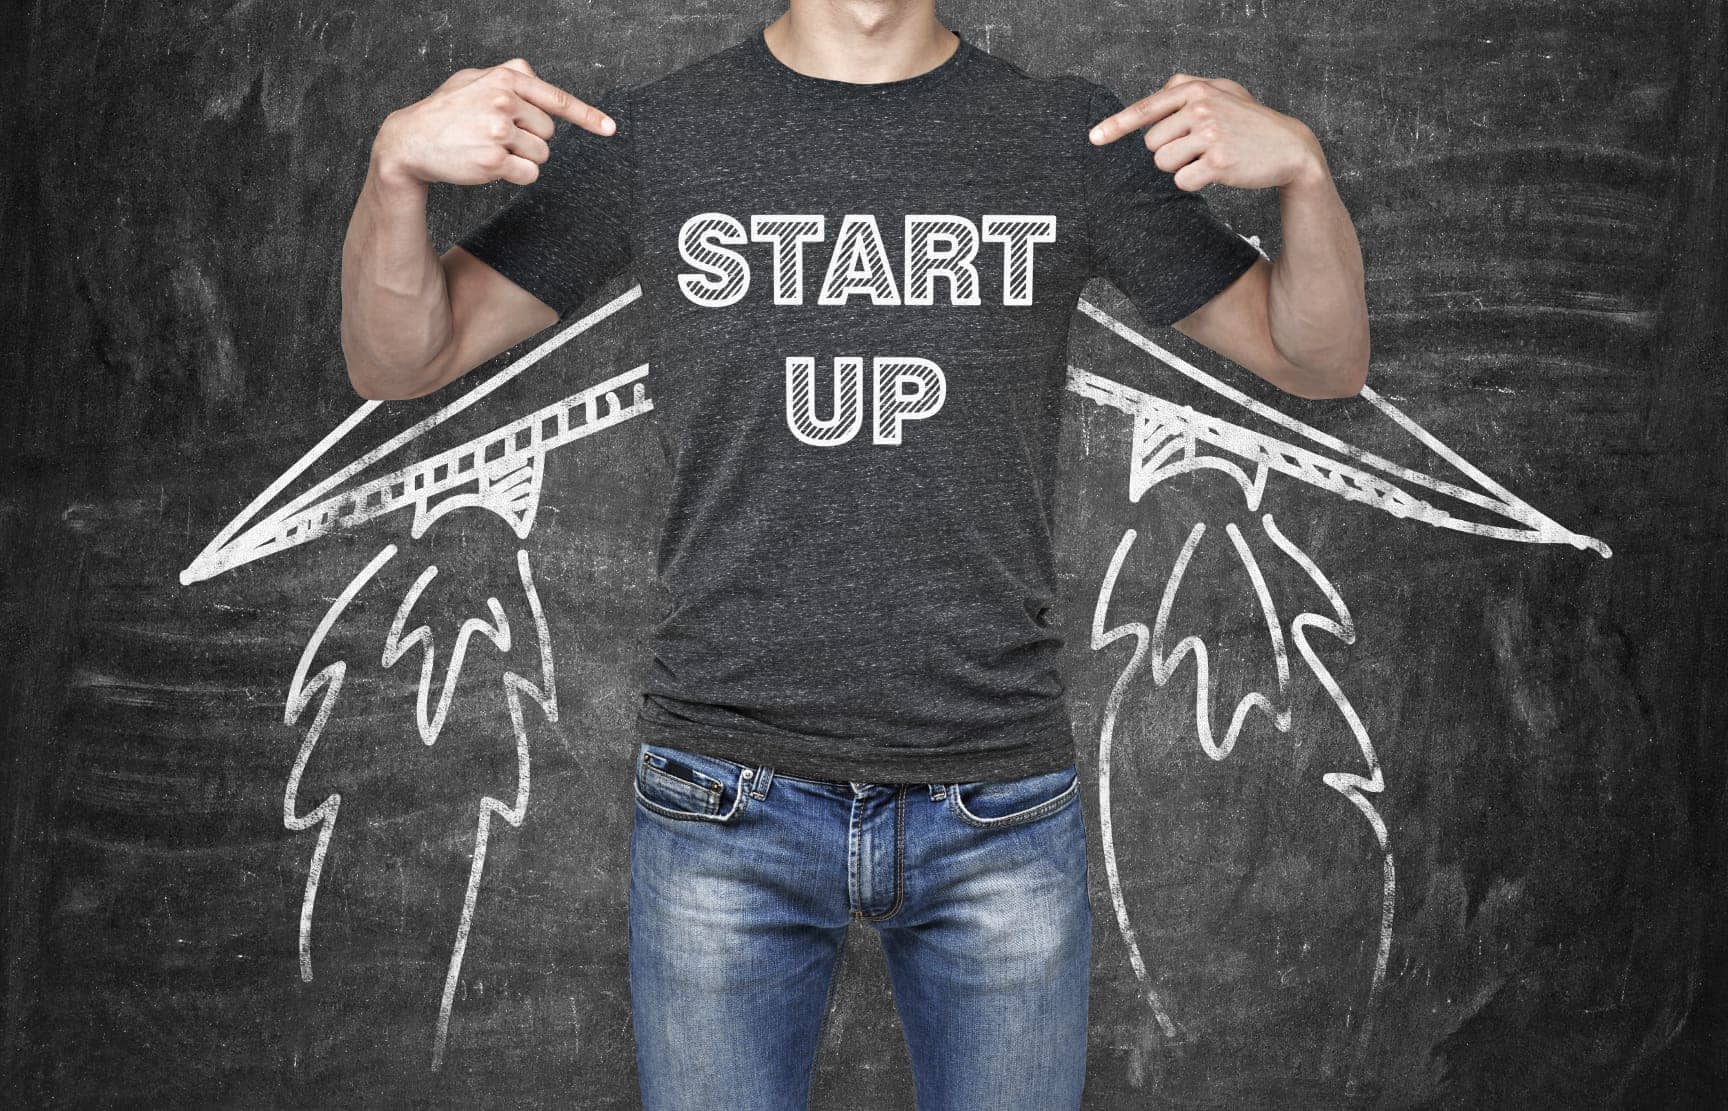 Top tips for naming your start-up business